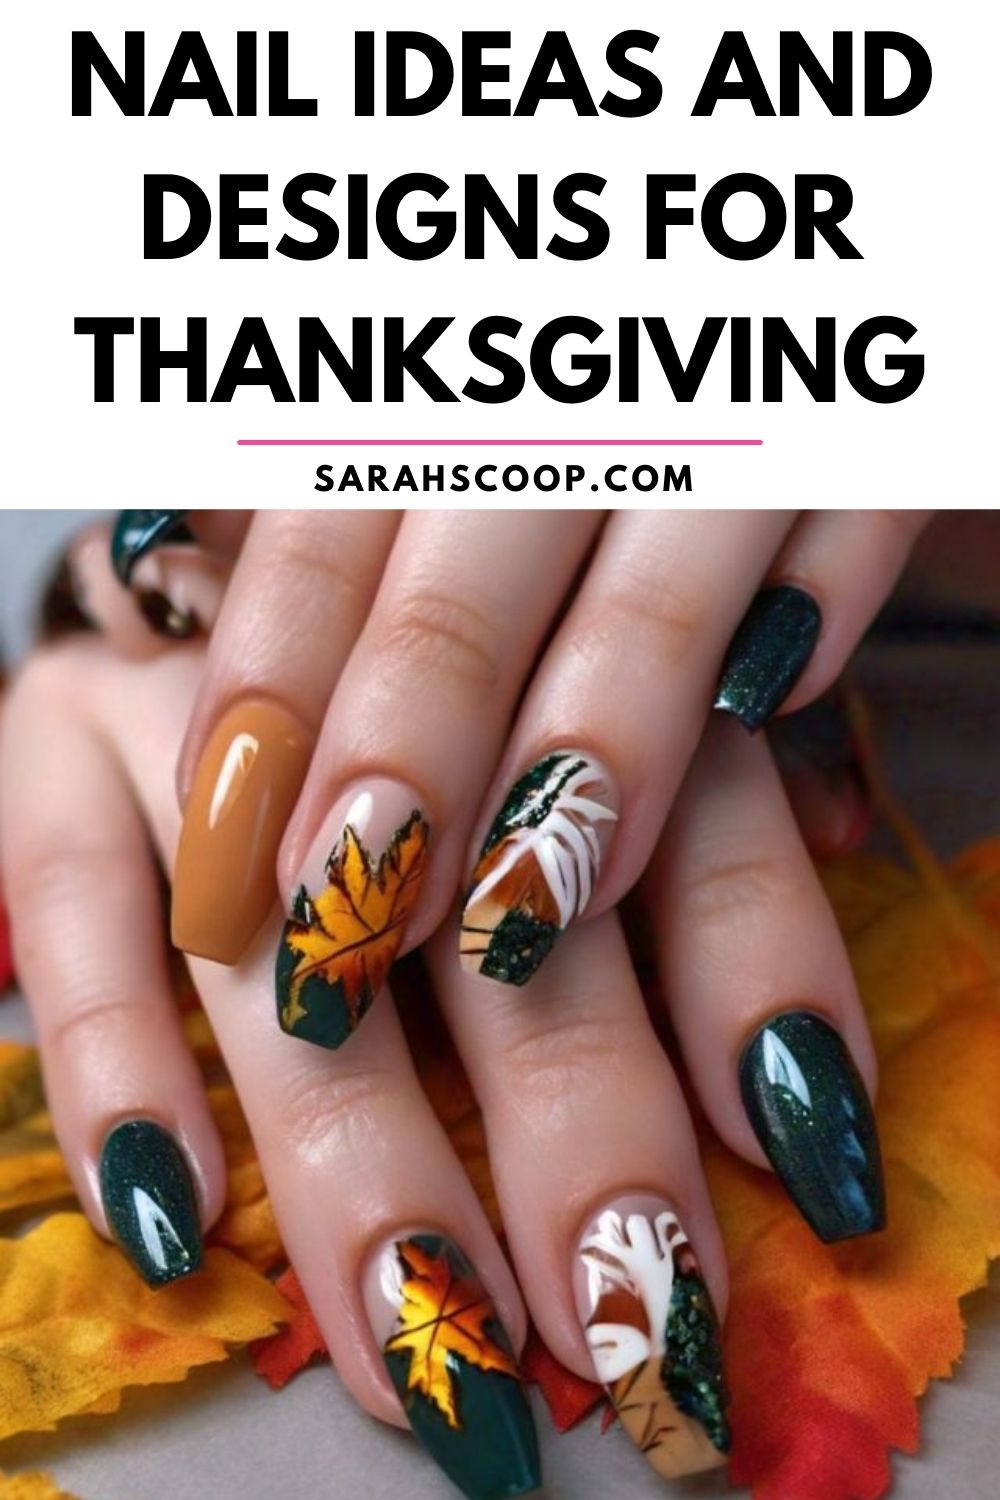 Nail ideas and designs for thanksgiving.